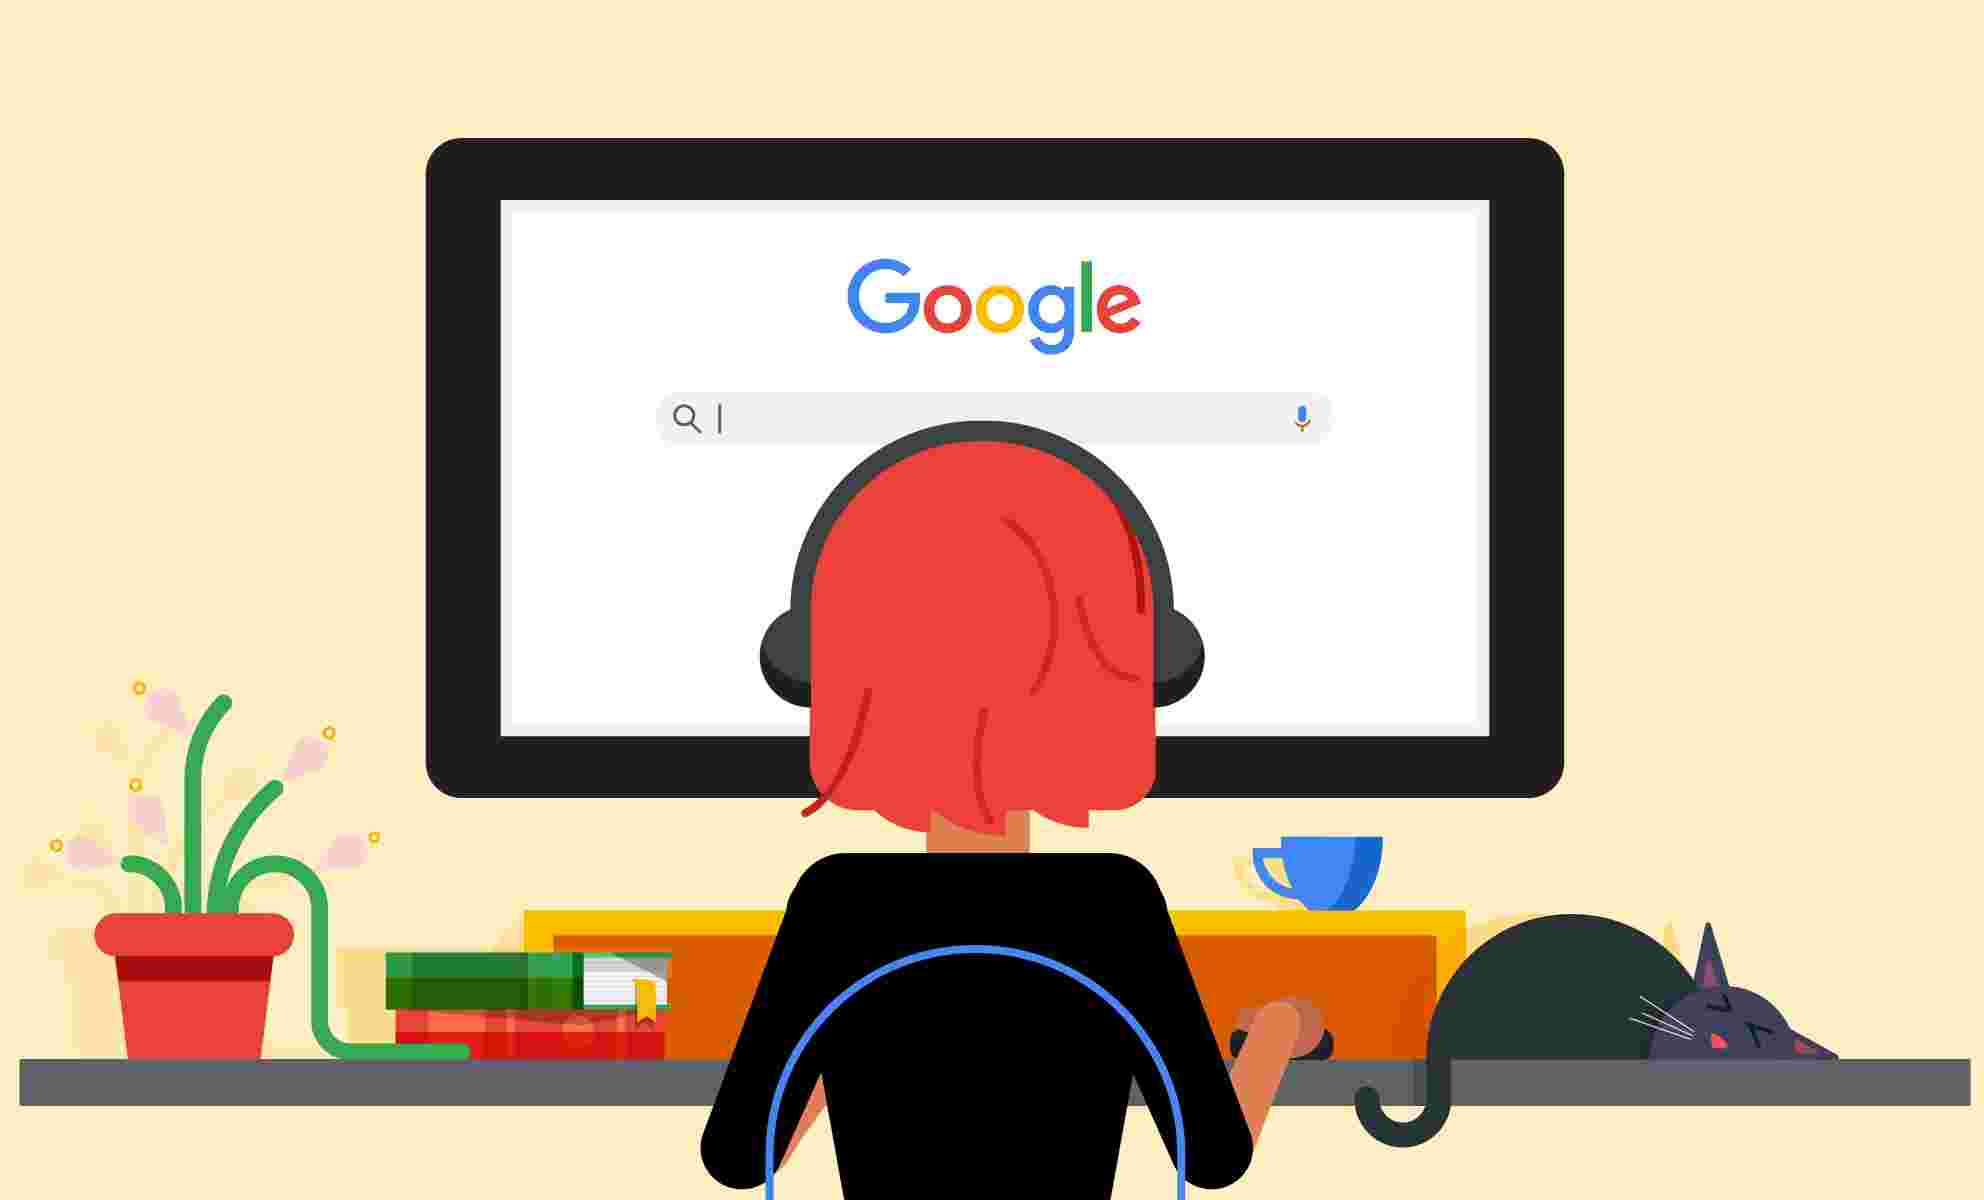 Conducting online search on Google